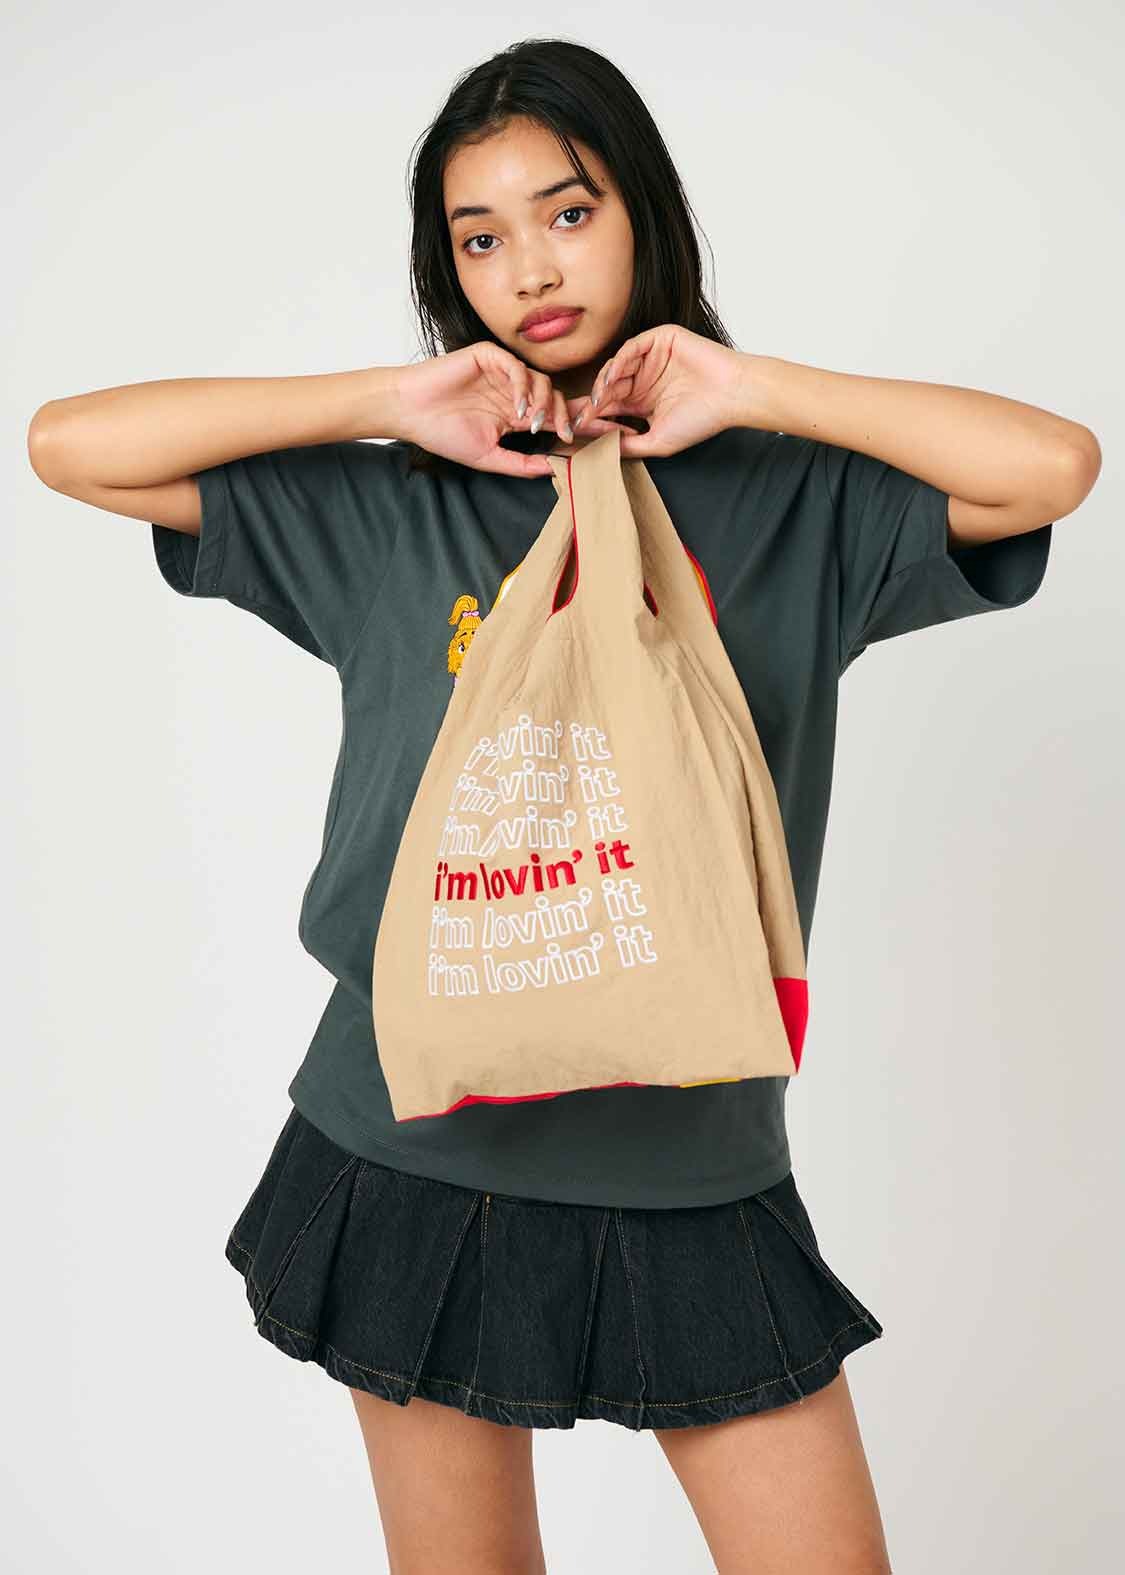 A model wears McDonald's x Graniph collaborative clothing & paper bag